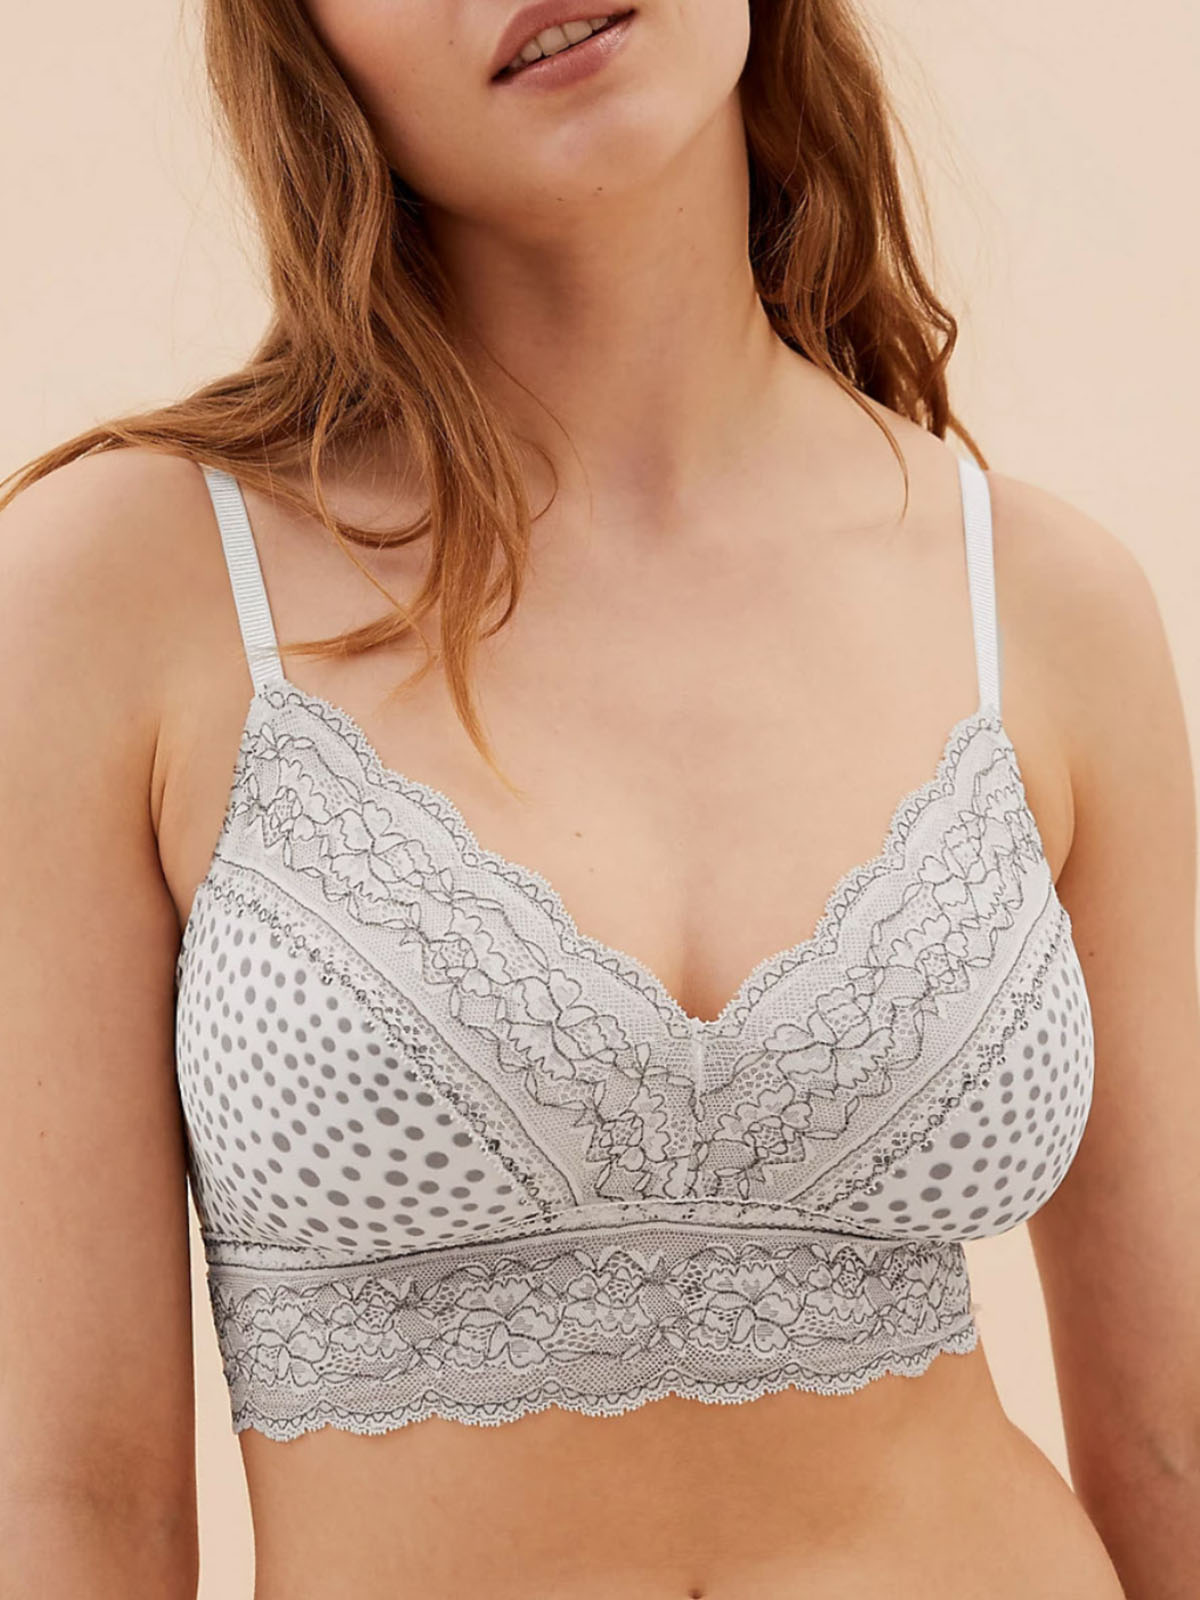  - - MEDIUM-GREY Lace Trim Non Wired Bralette - Size 10 to 22